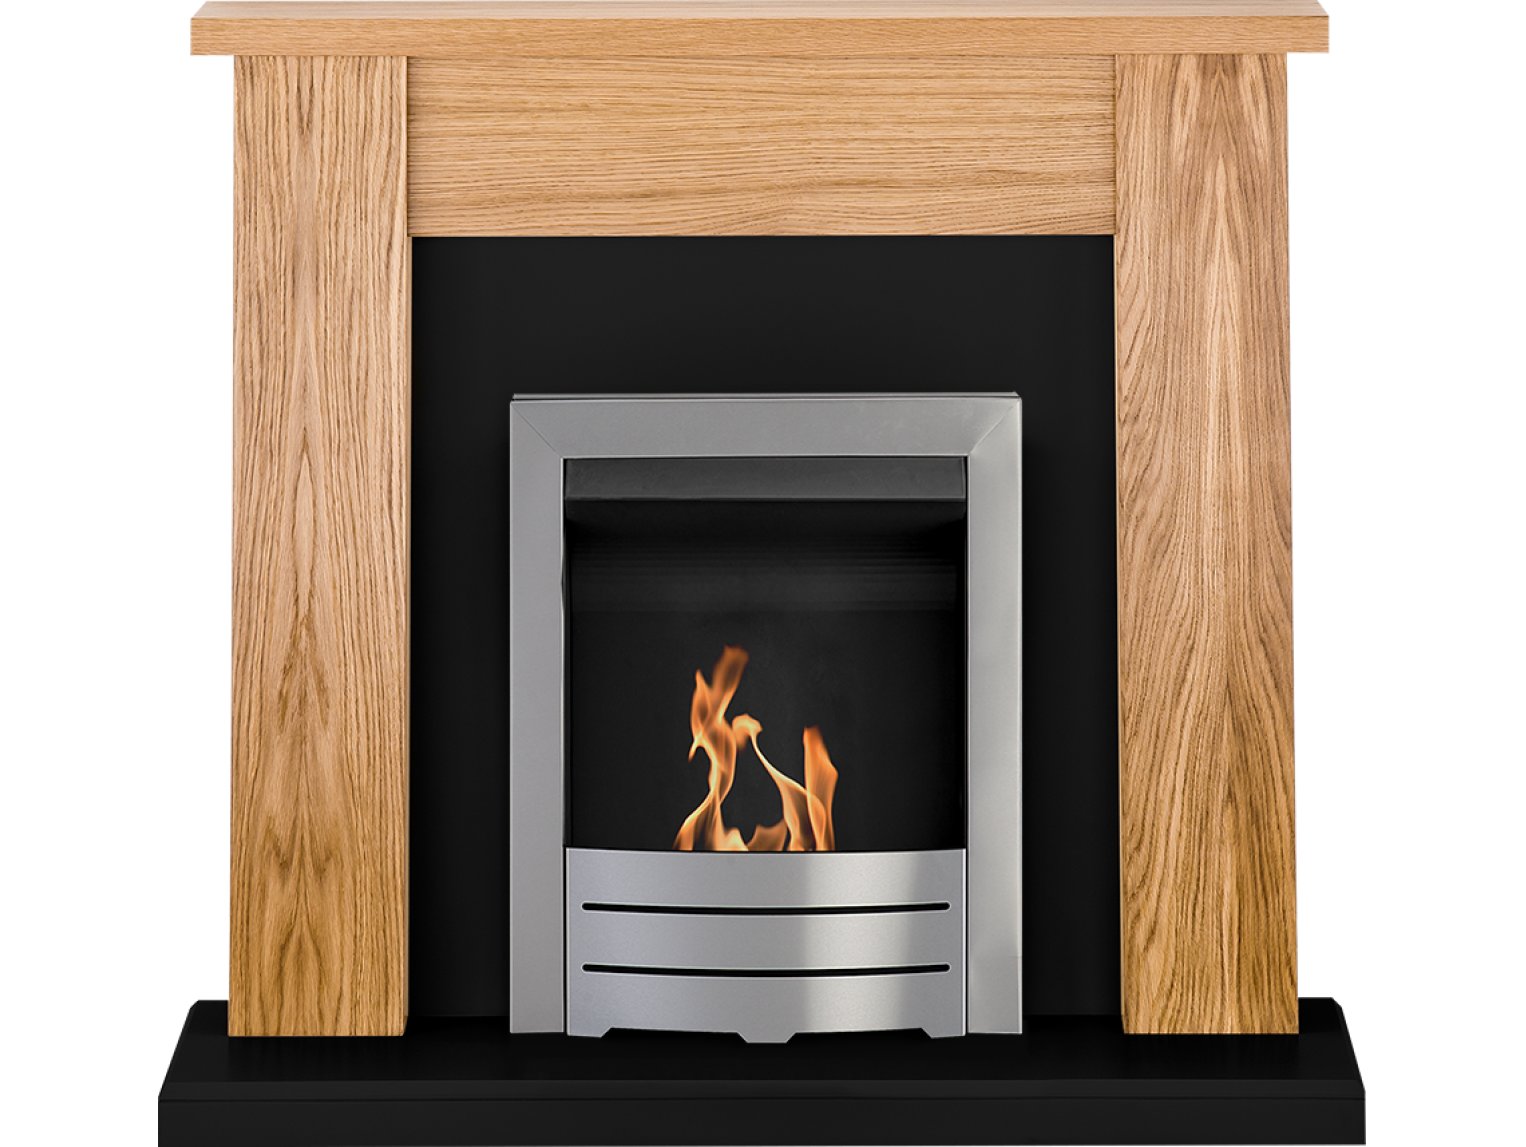 Adam New England Fireplace Suite Oak & Black with Colorado Bio Ethanol Fire in Brushed Steel 48 inch